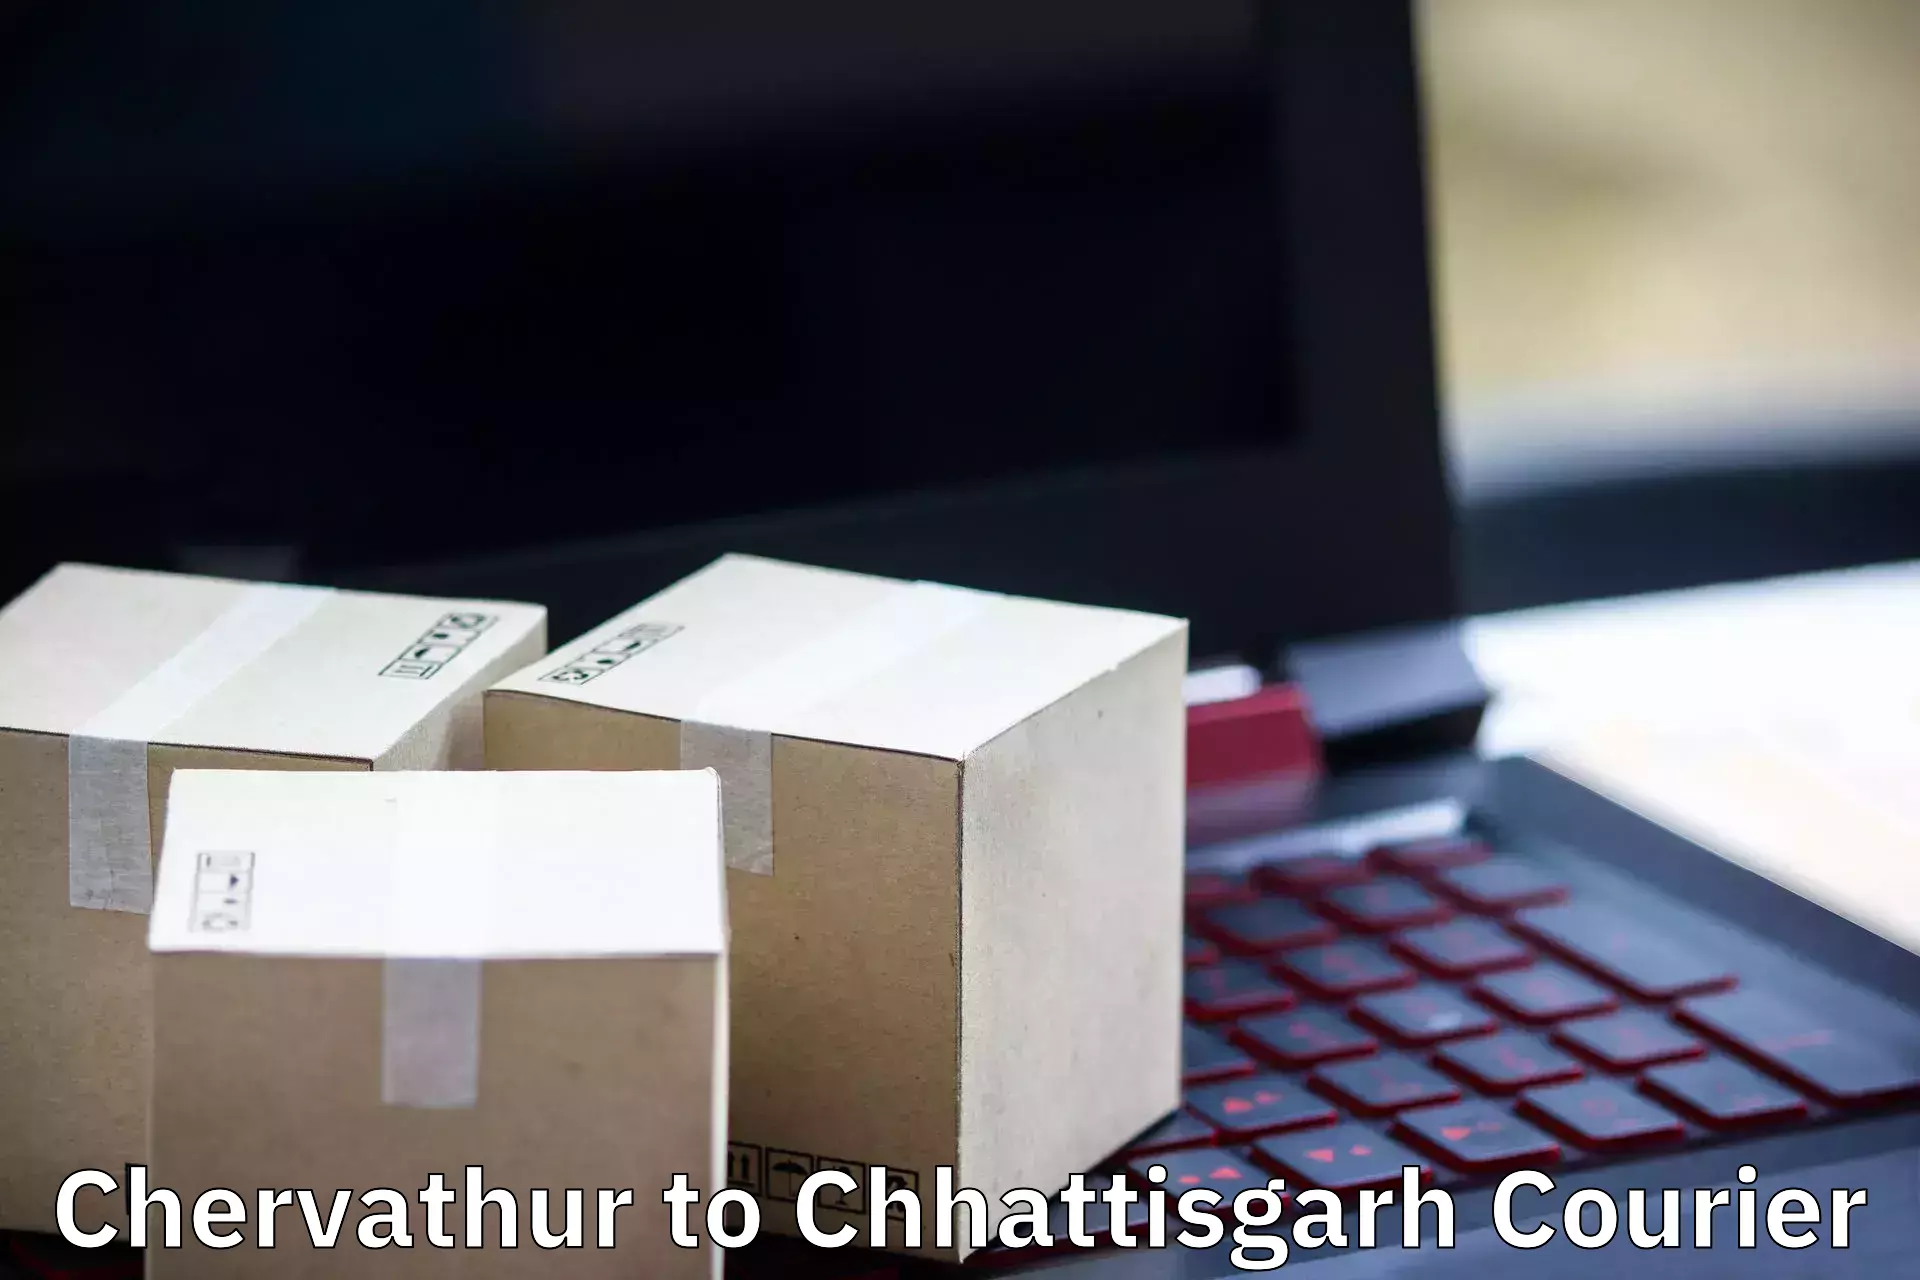 Home relocation experts Chervathur to Jaijaipur